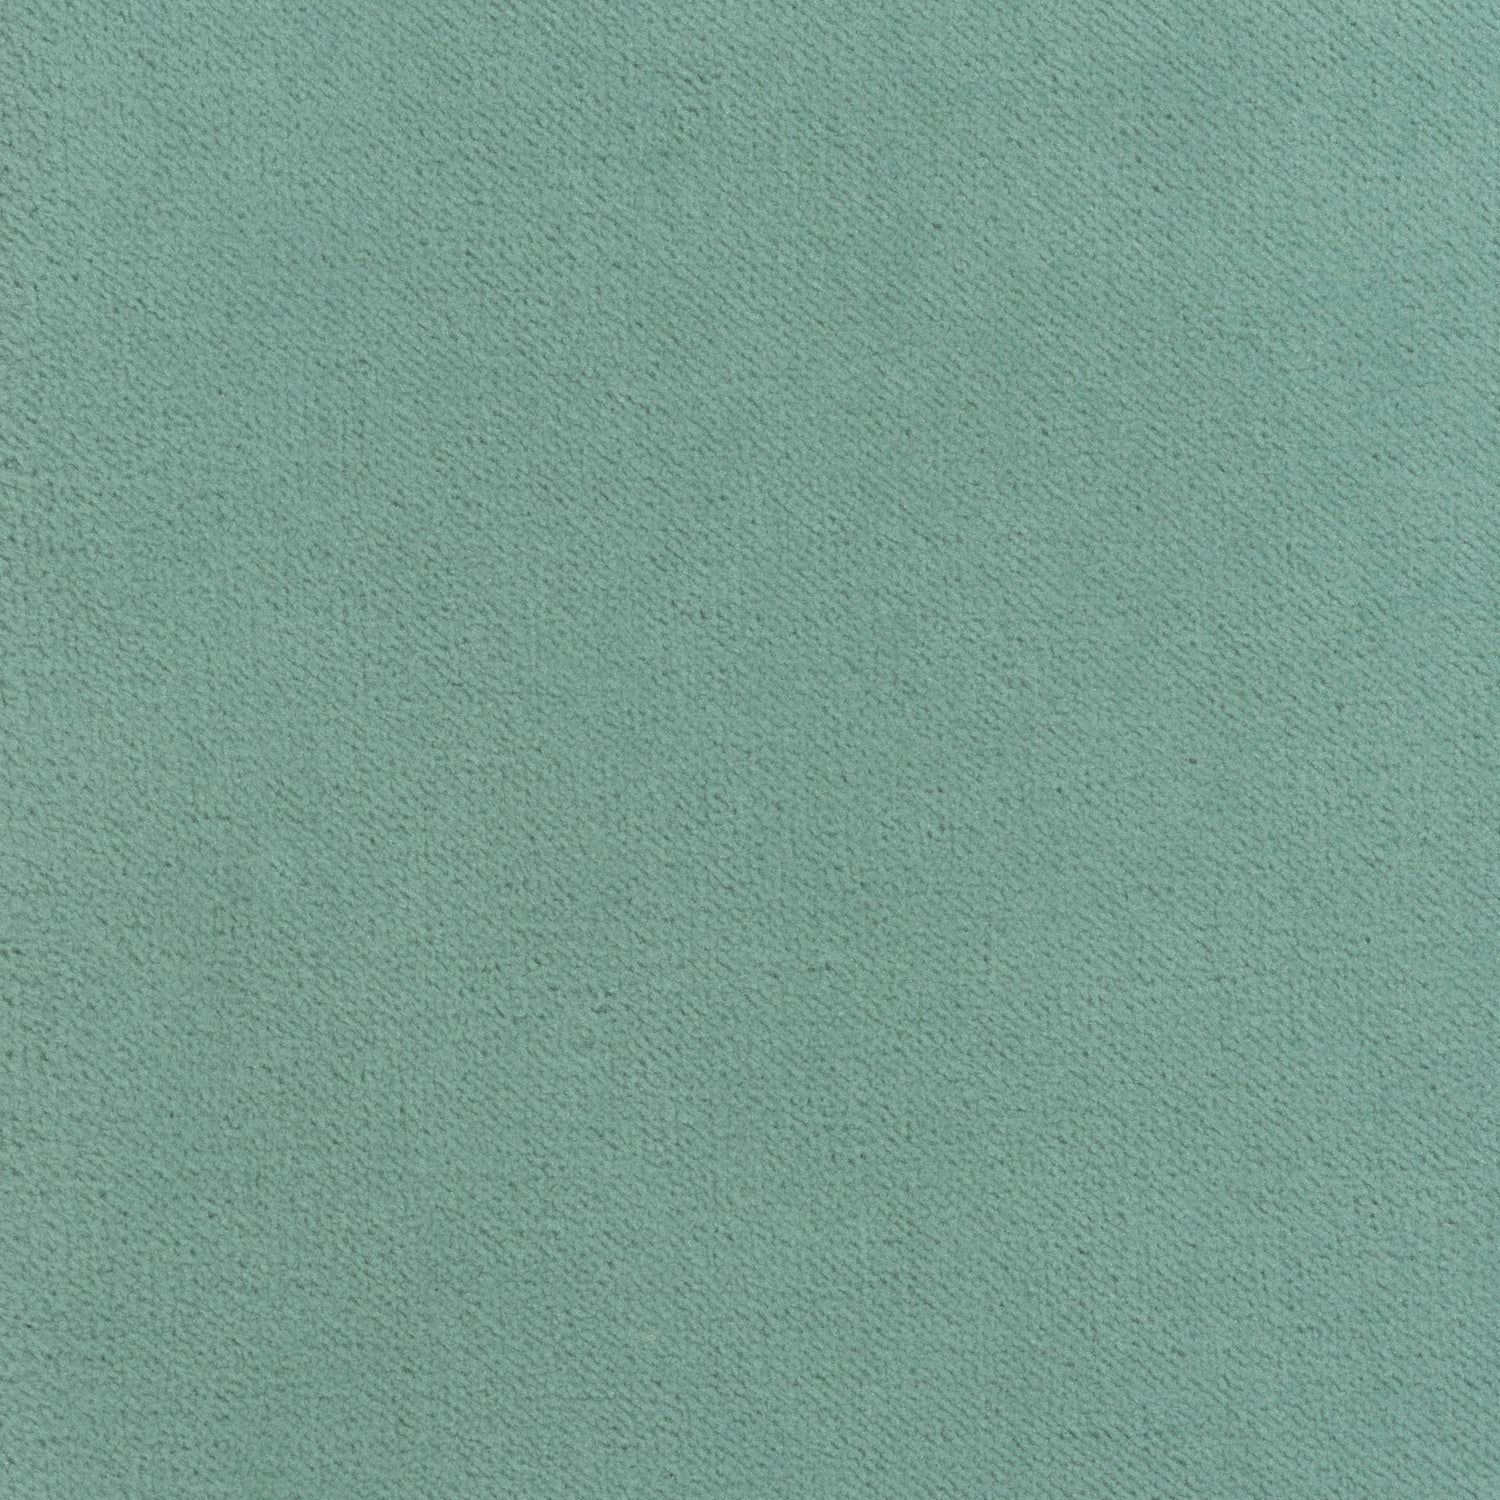 Club Velvet fabric in seafoam color - pattern number W7247 - by Thibaut in the Club Velvet collection